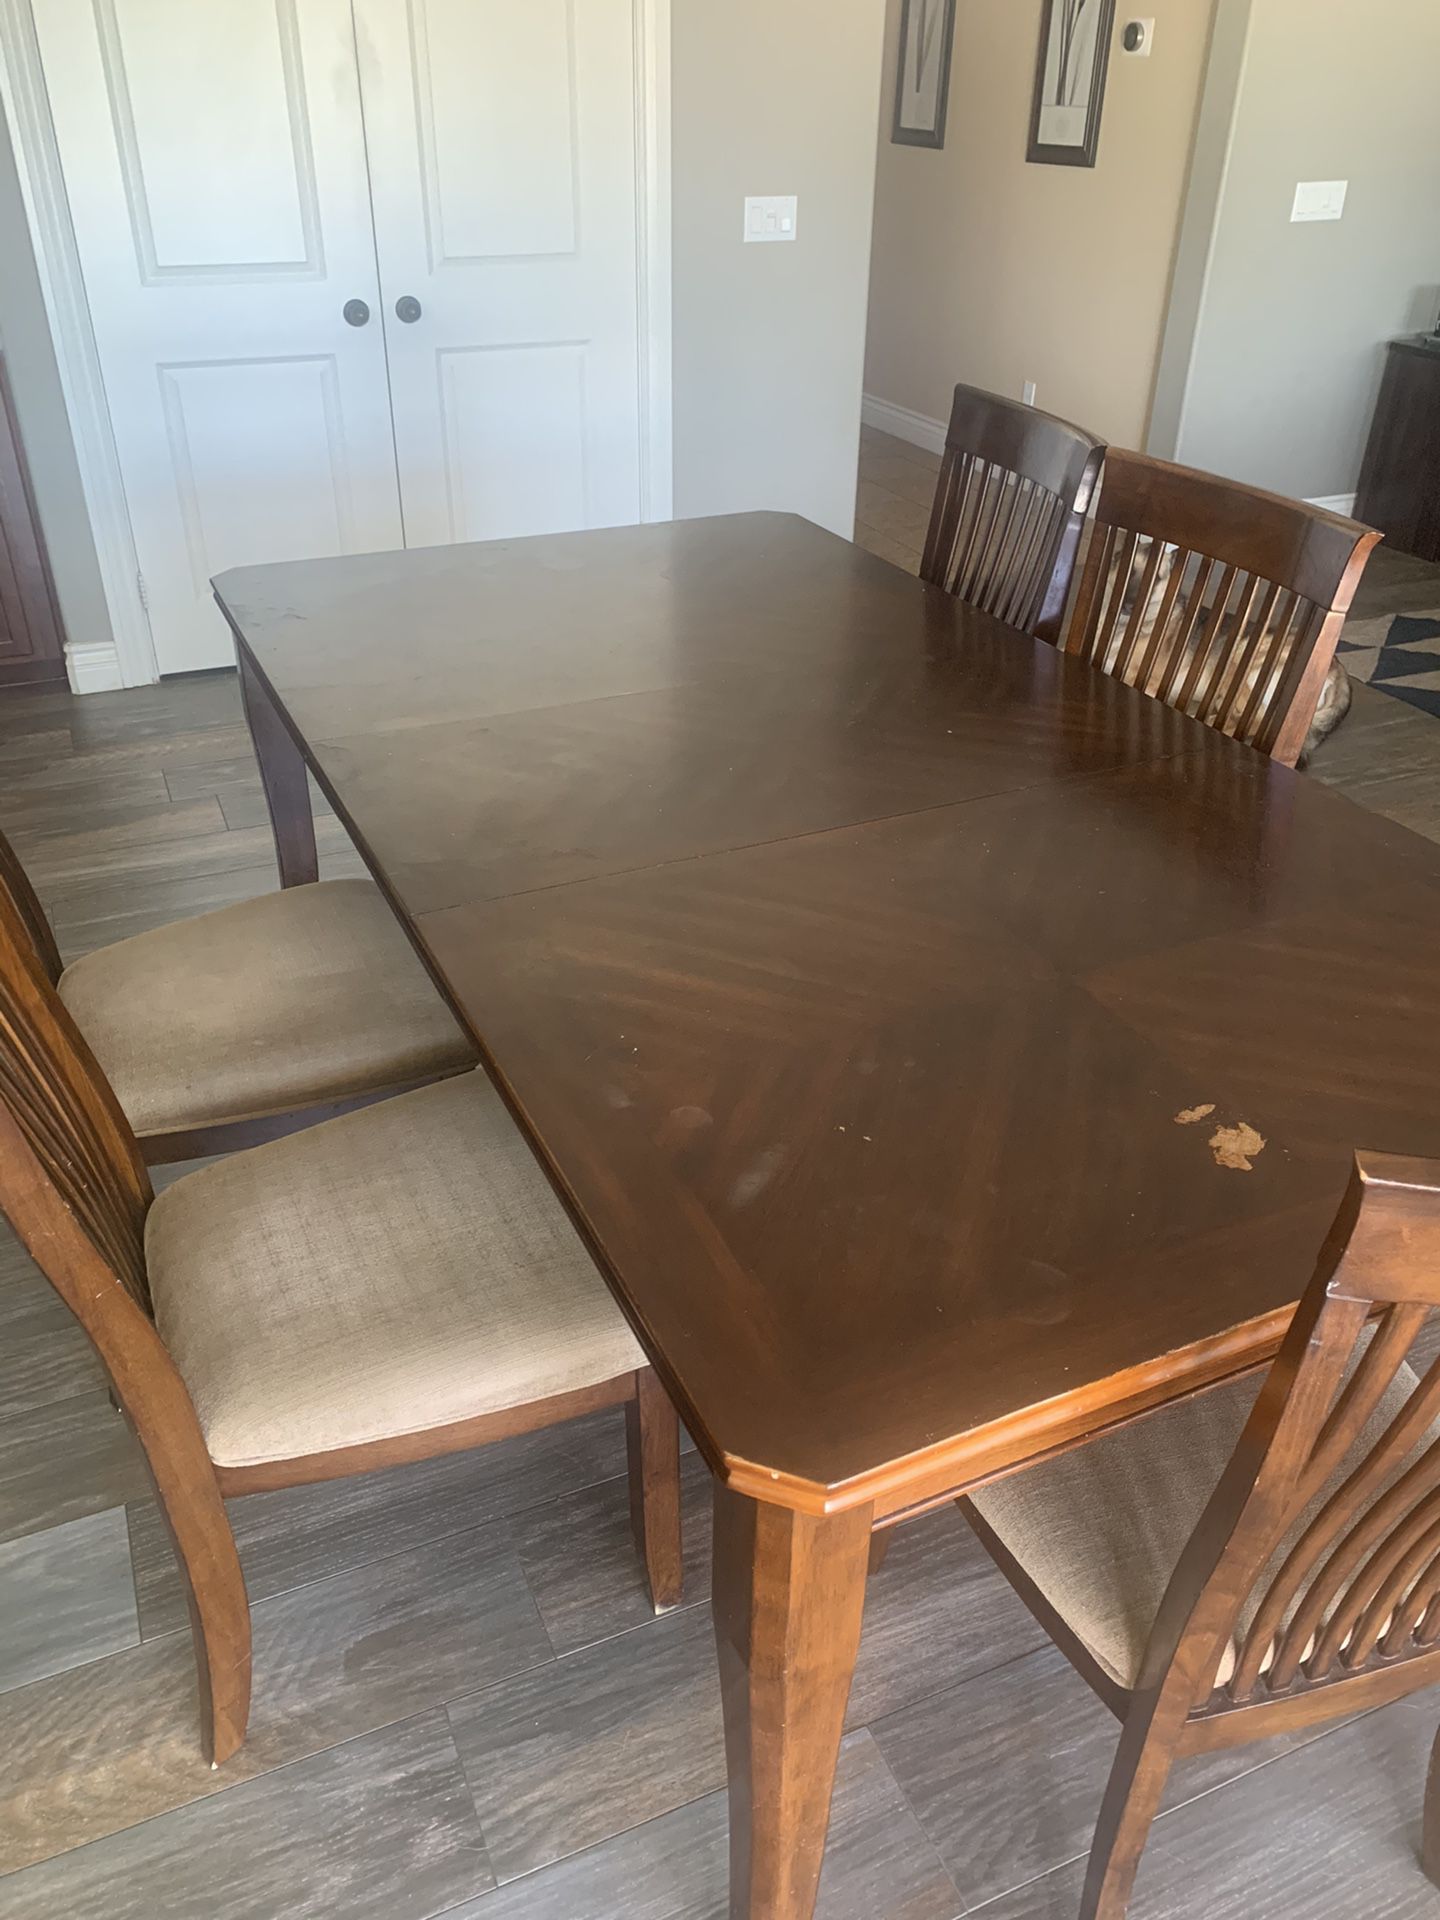 Kitchen table w/ 5 chairs